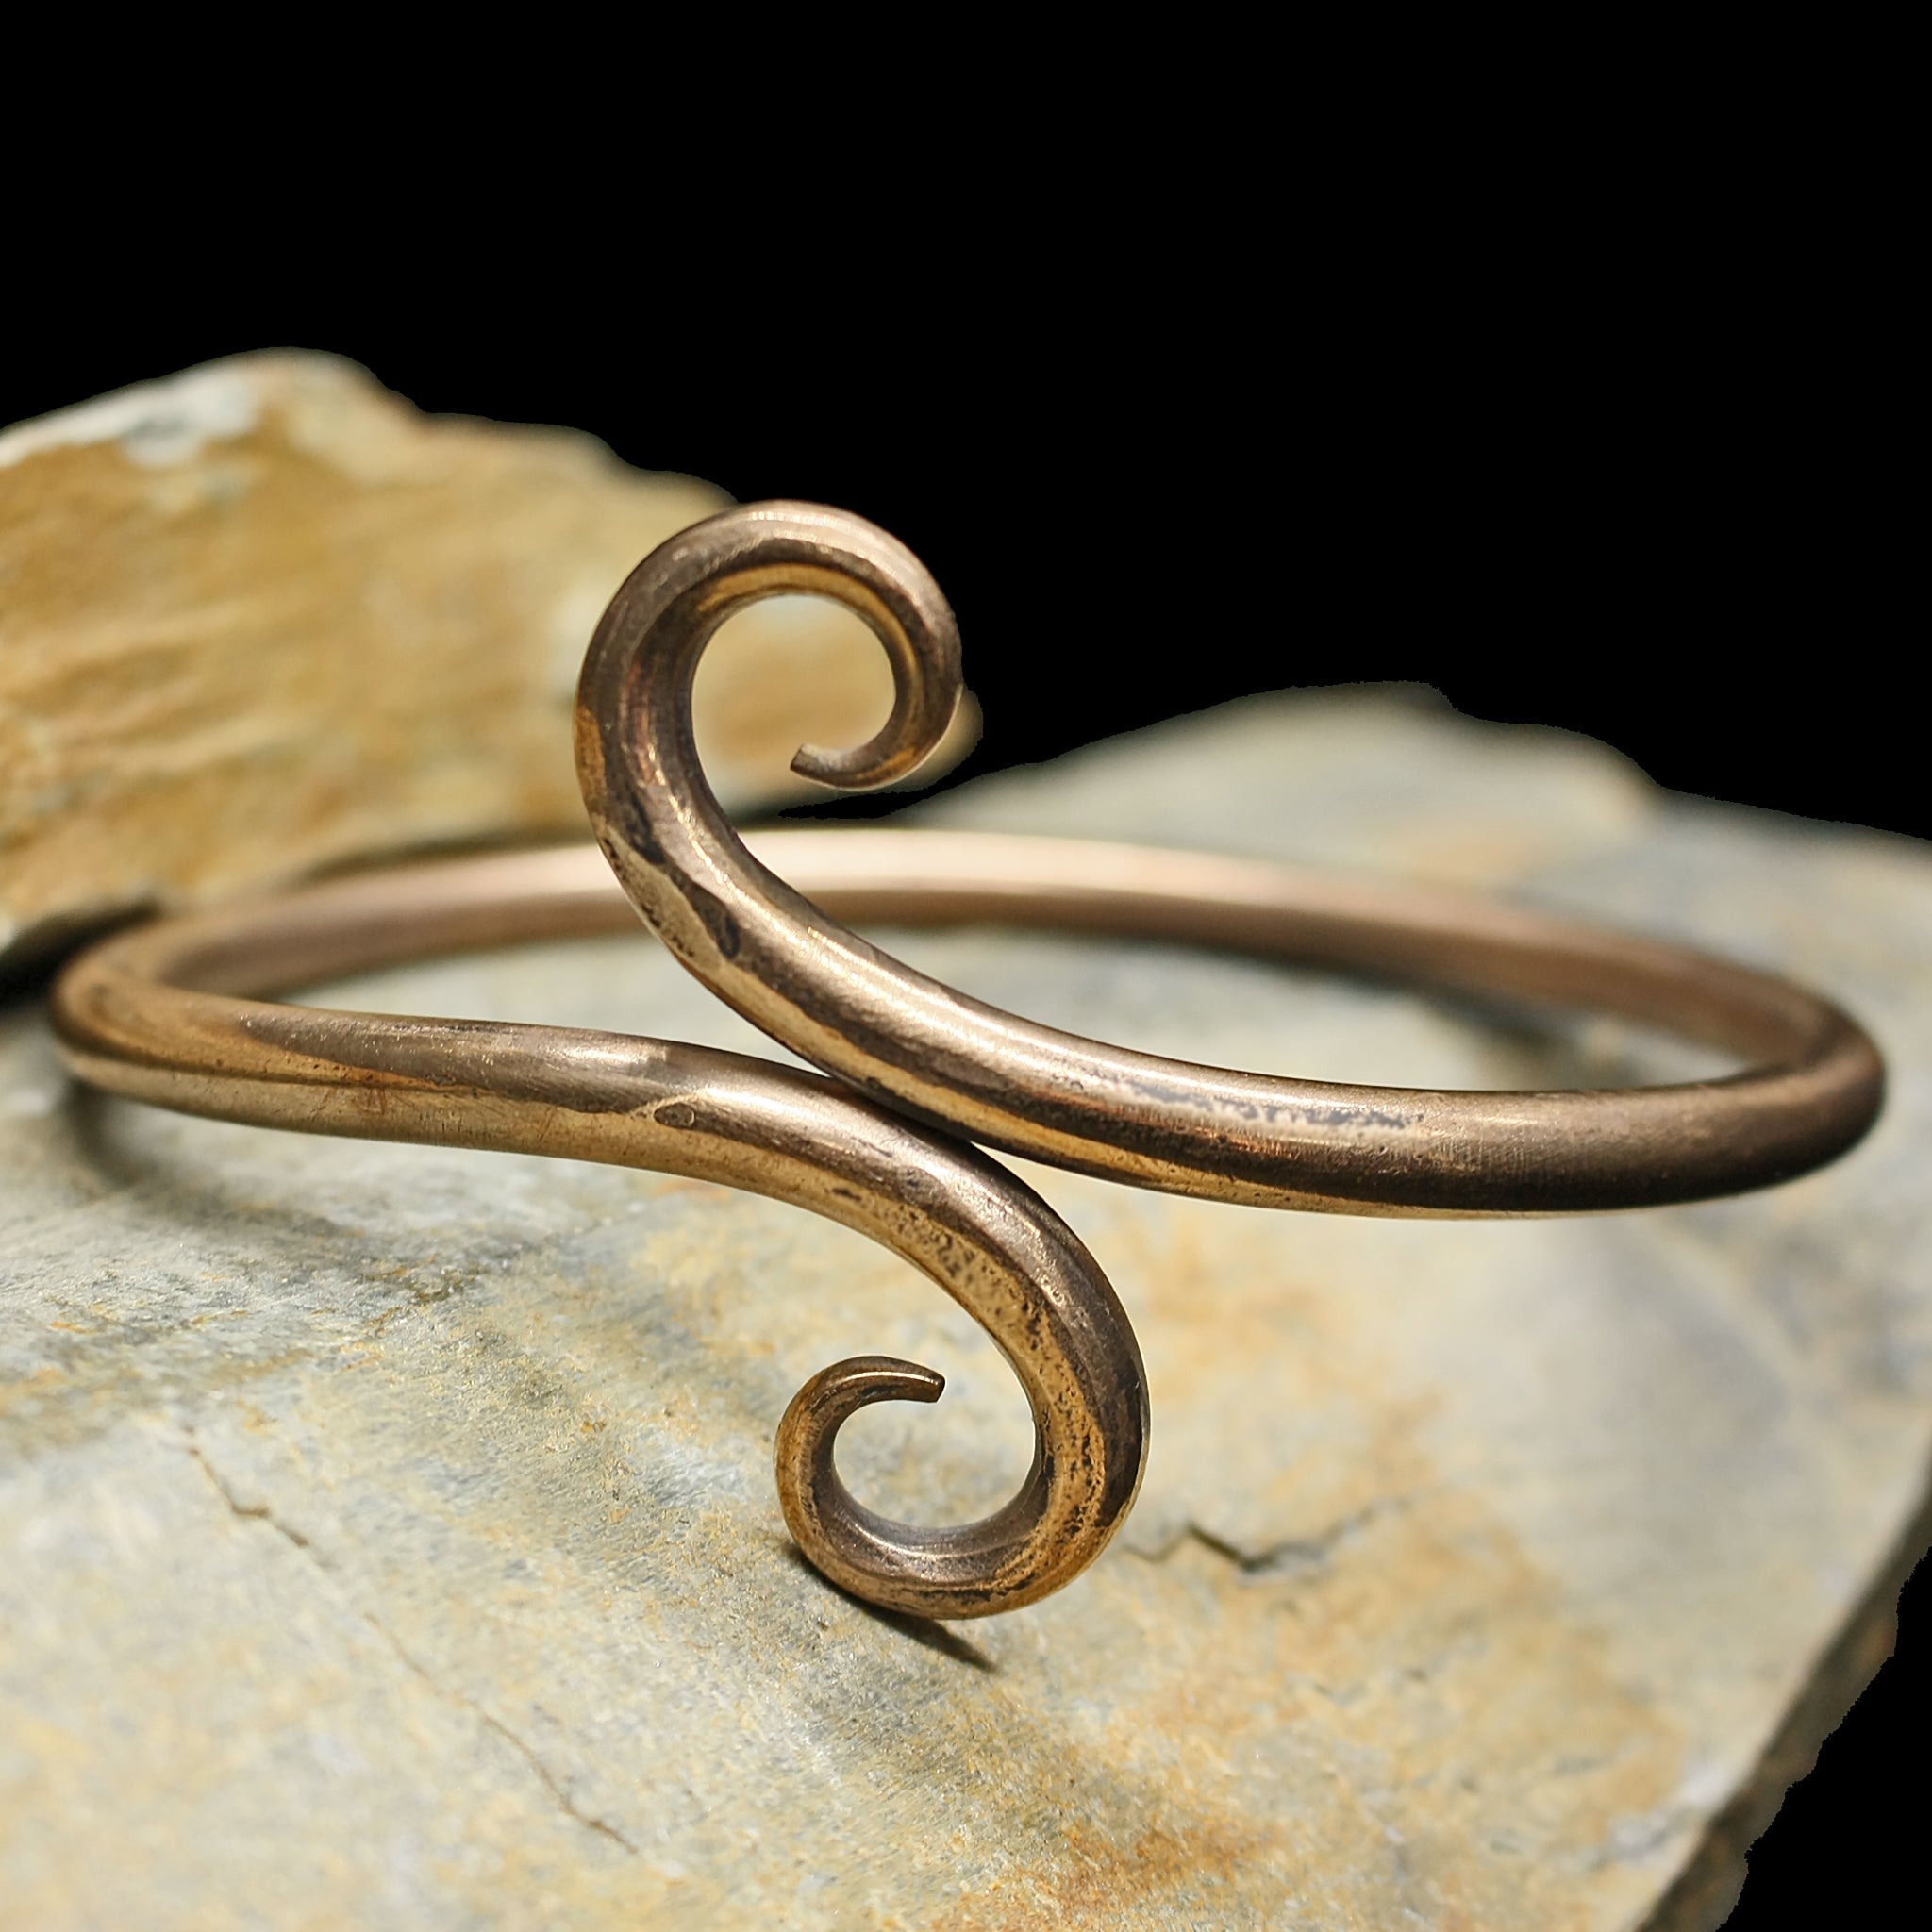 Replica Viking Arm Ring / Arm Band / Torc in Solid Bronze on Rock